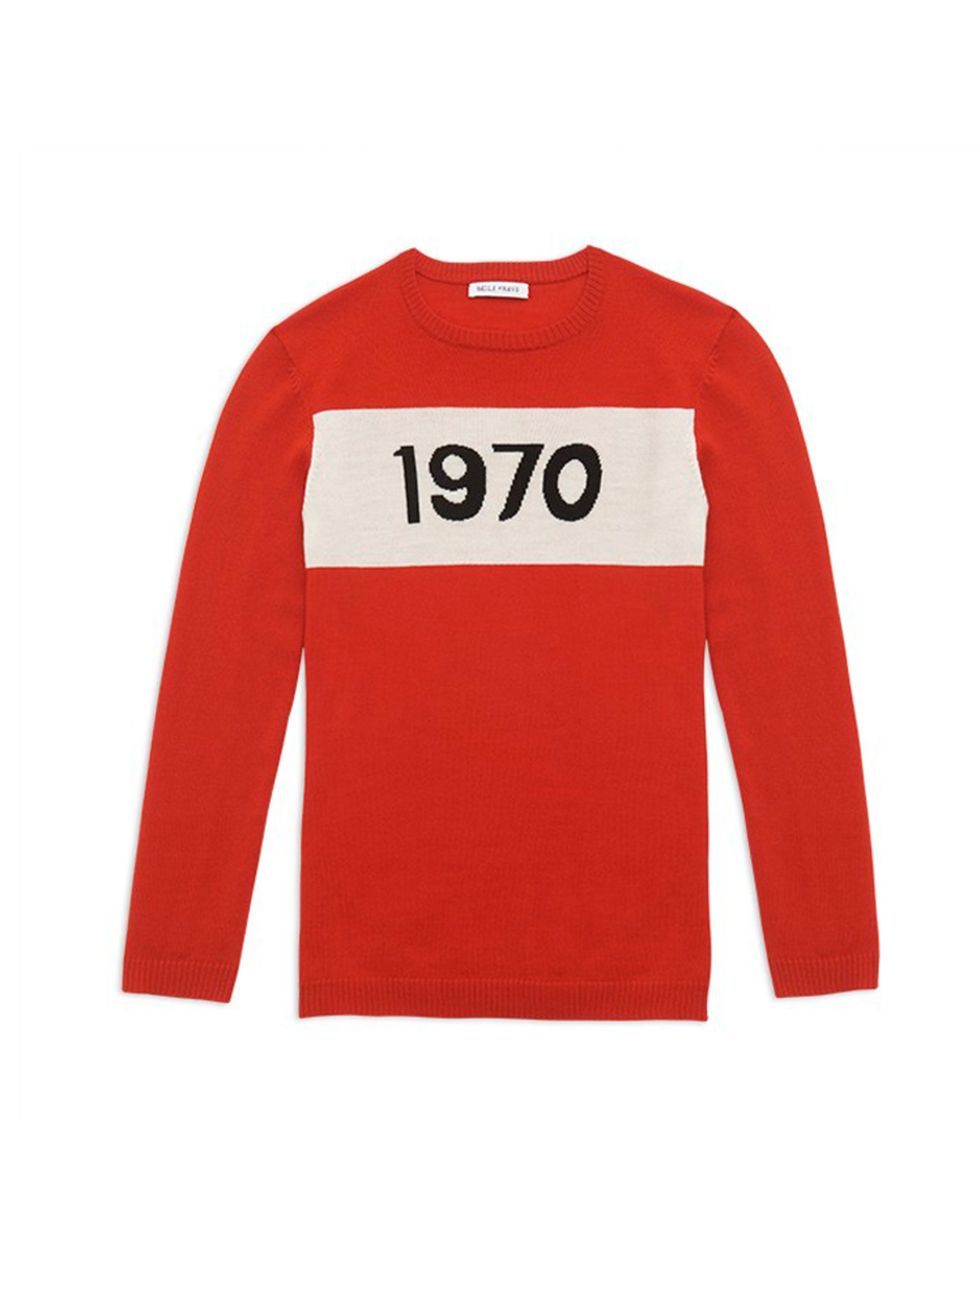 <p>Bella Freud</p>

<p>Great for fine knits with bold slogans, like this 1970 jumper. Just add denim and that's your weekend wardrobe sorted.</p>

<p>£270, by <a href="http://www.bellafreud.com/1970-jumper-red.html">Bella Freud</a></p>